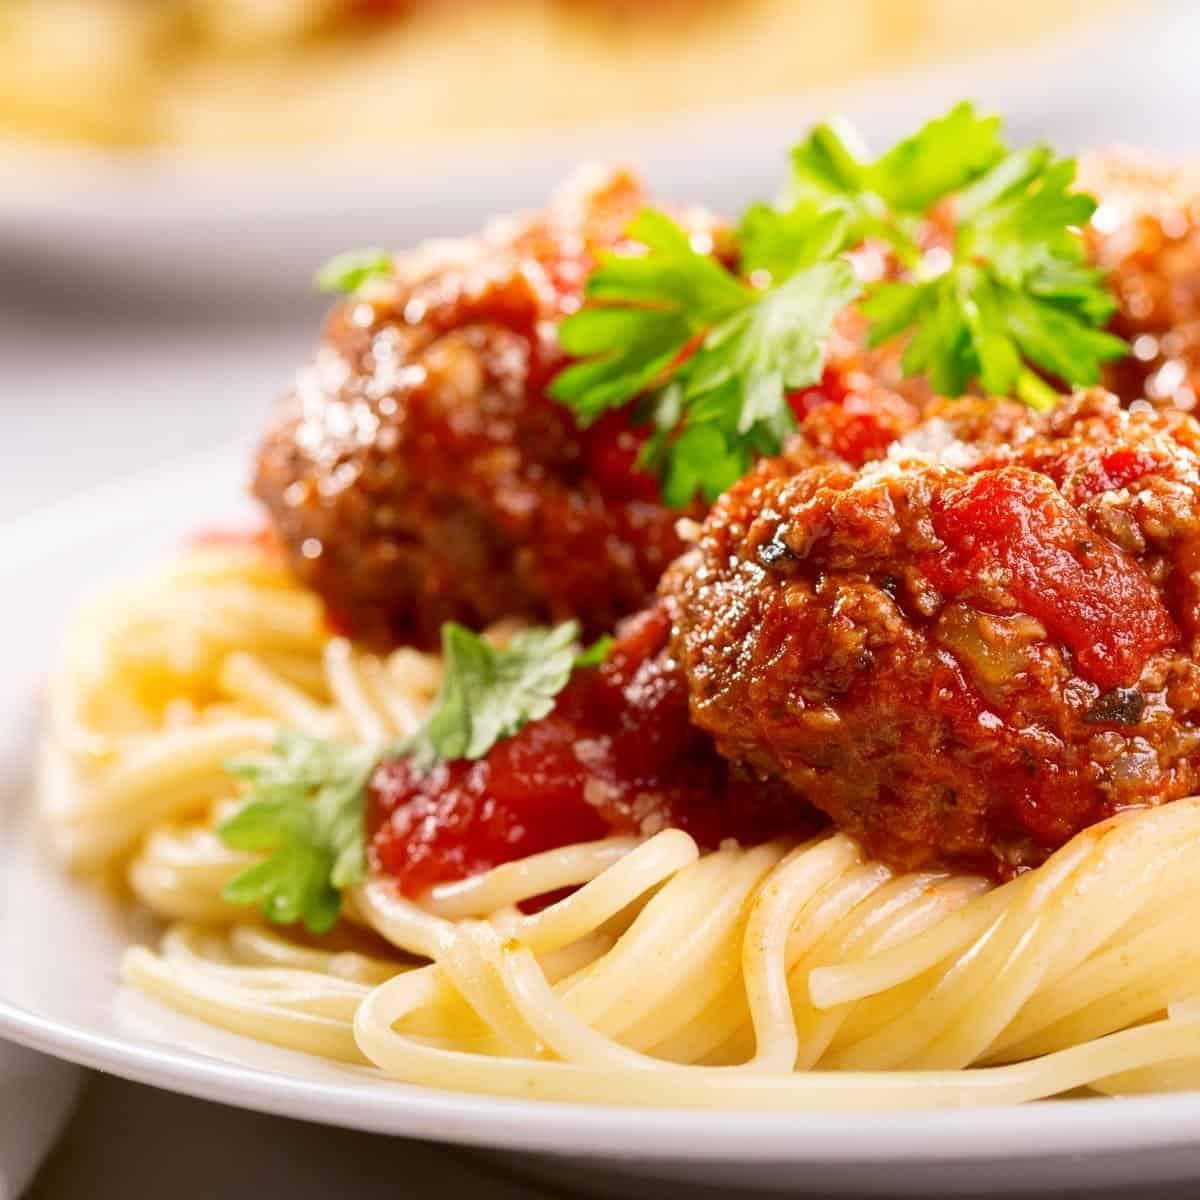 A close up of a plate of food, with Spaghetti and Meatball